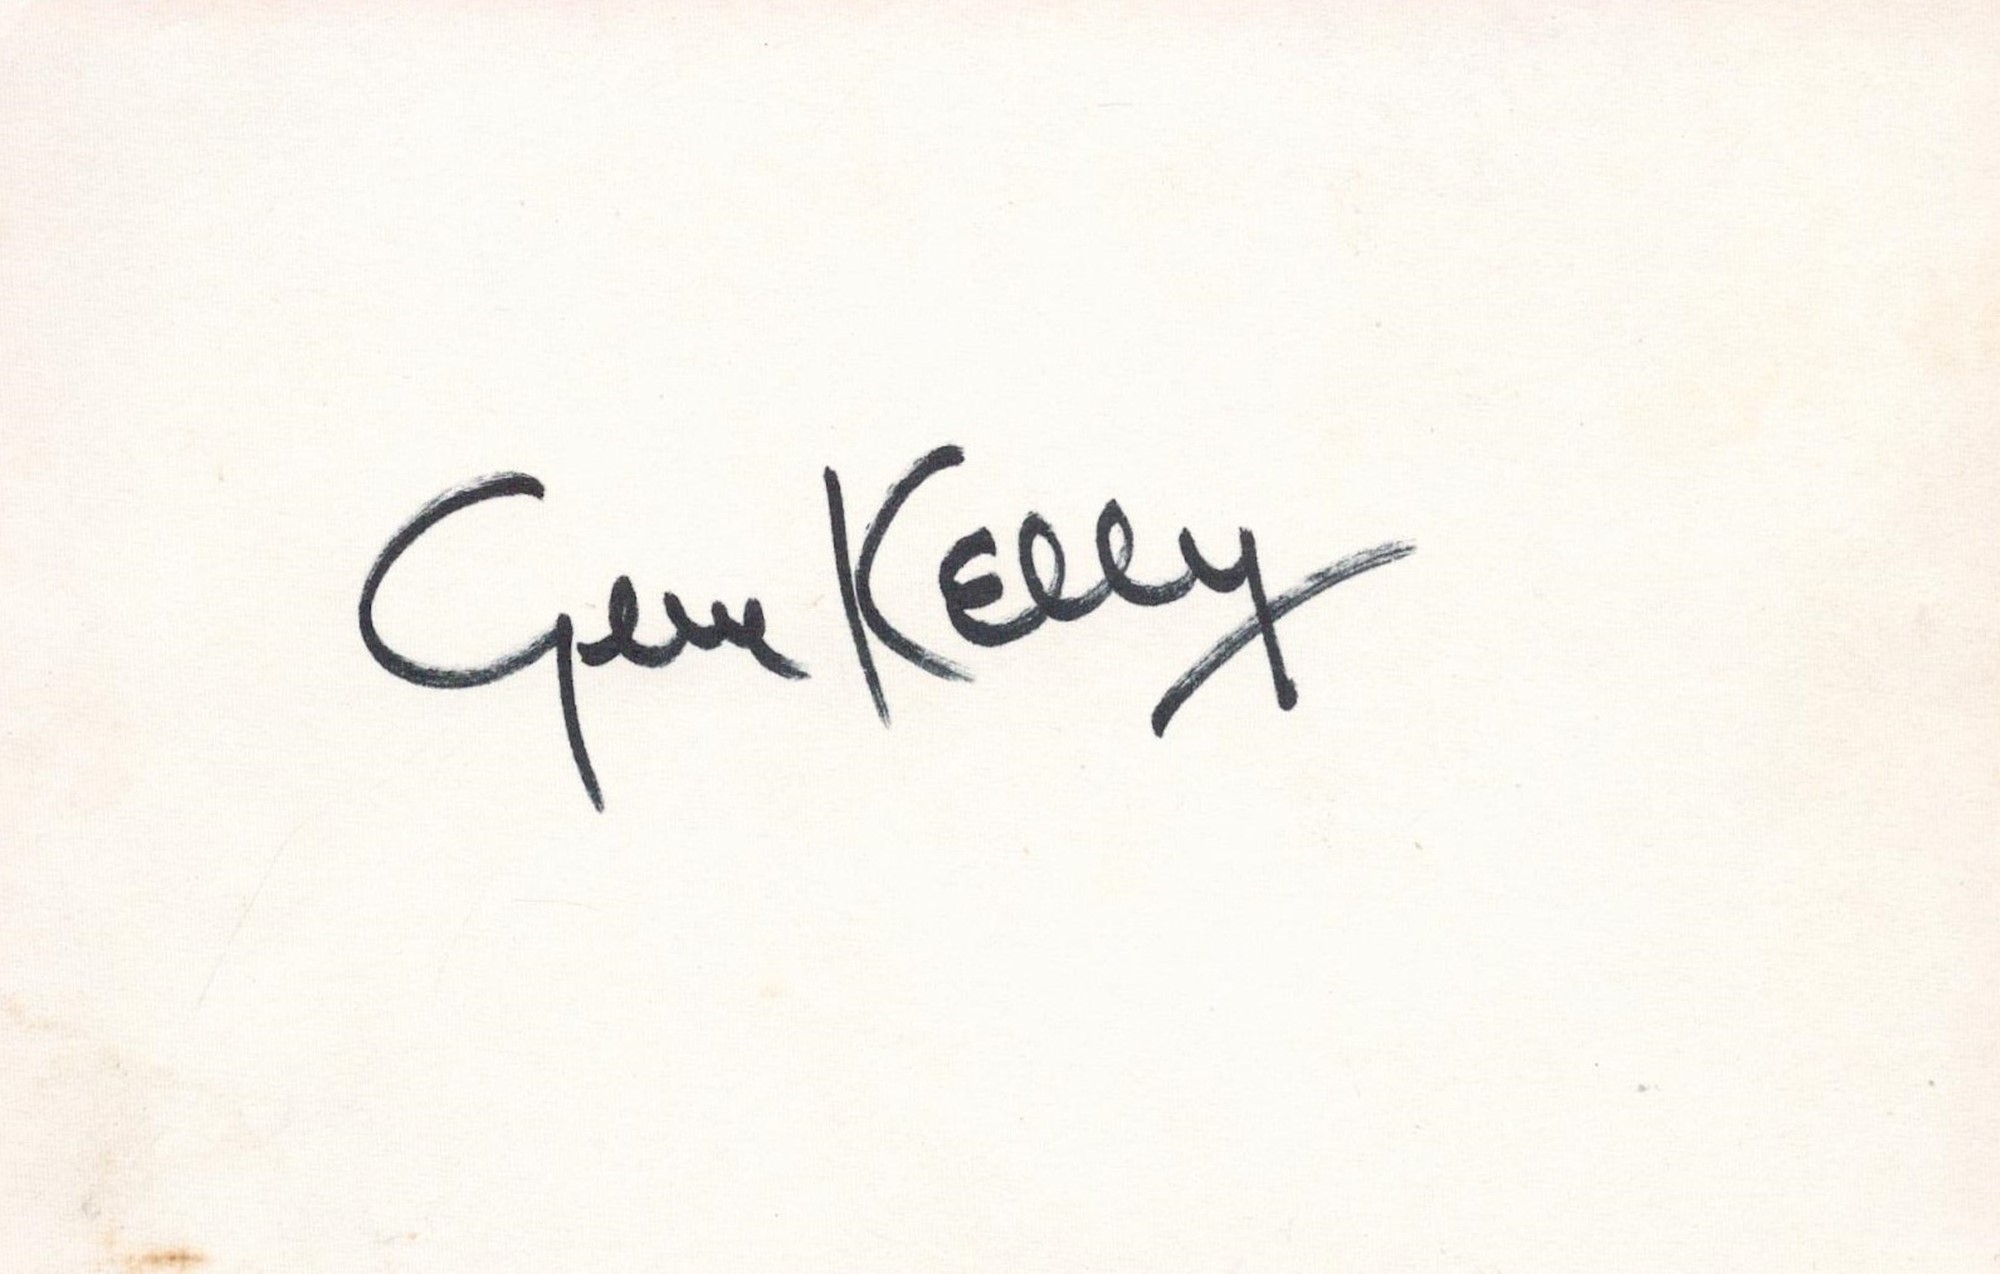 Gene Kelly signed 6x4 white card. Eugene Curran Kelly (August 23, 1912 - February 2, 1996) was an